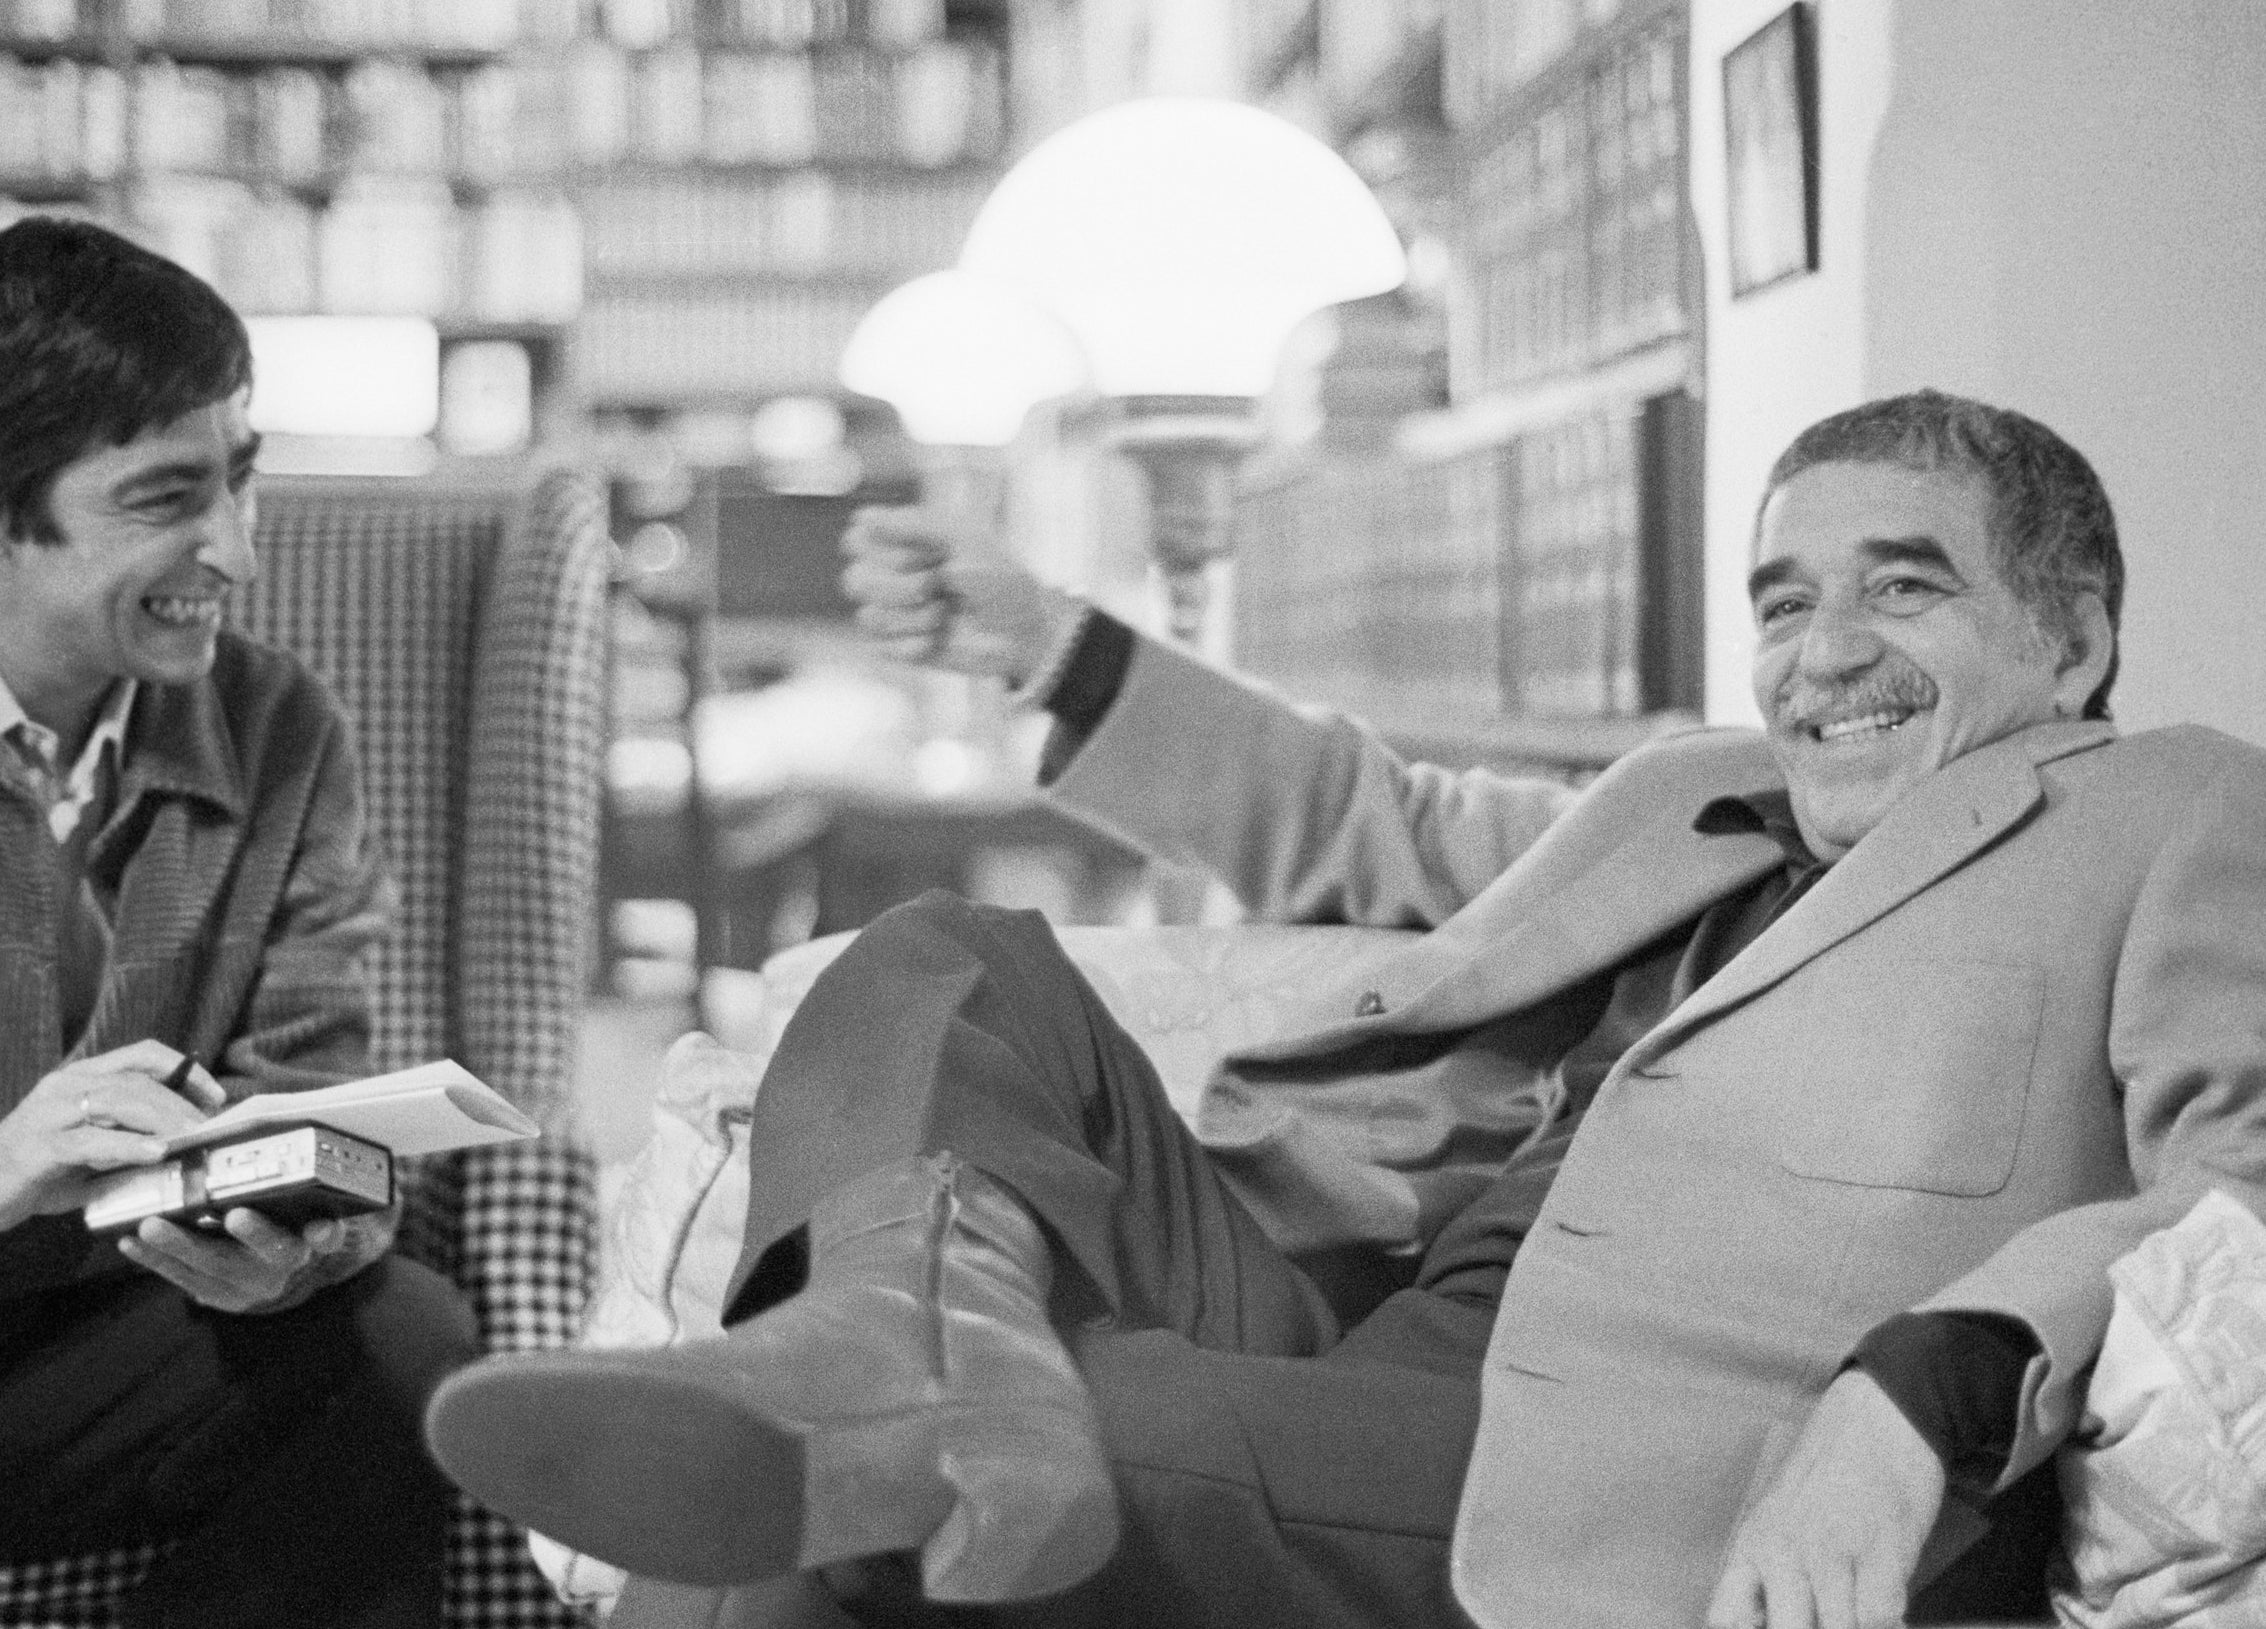 Gabriel Garcia Marquez, author of One Hundred Years of Solitude, relaxing in his home